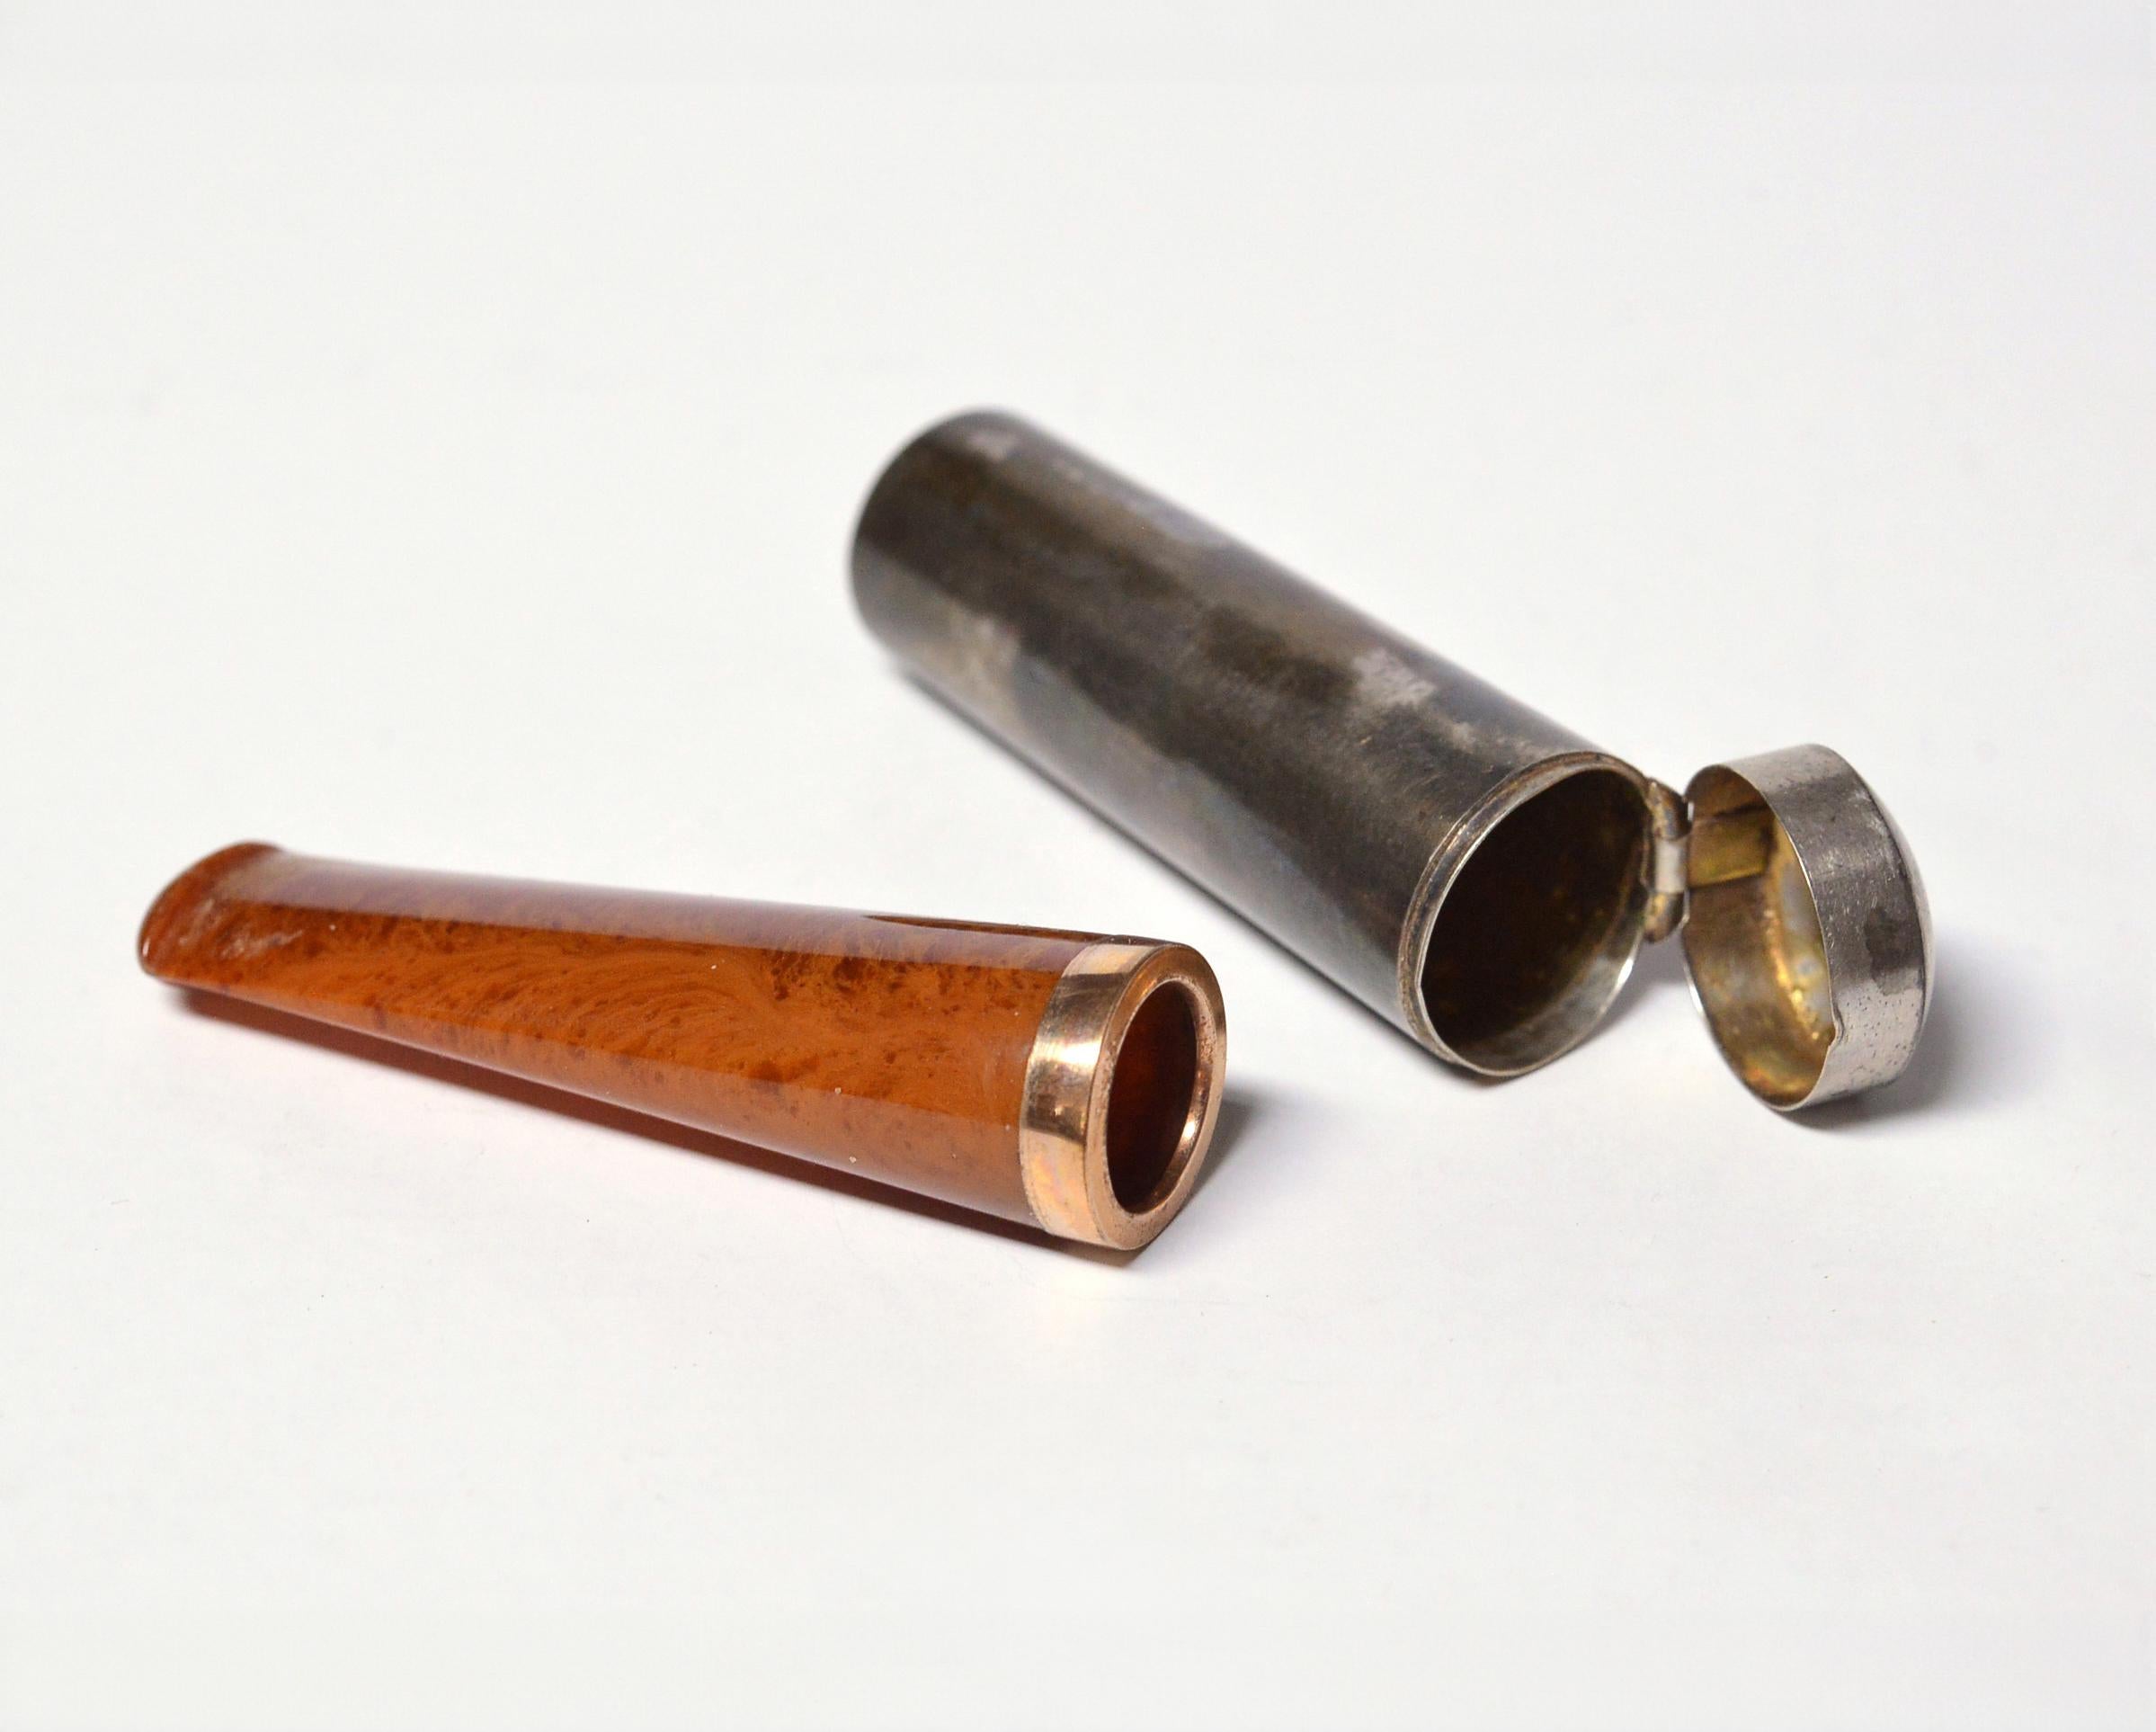 Caliber 11 mm (or 0,43 inches) Mouthpiece. By German or Baltic maker, unmarked besides Swedish purity hallmarks. The early 20th century was a period of great change and innovation, yet it also celebrated the traditional values of craftsmanship and